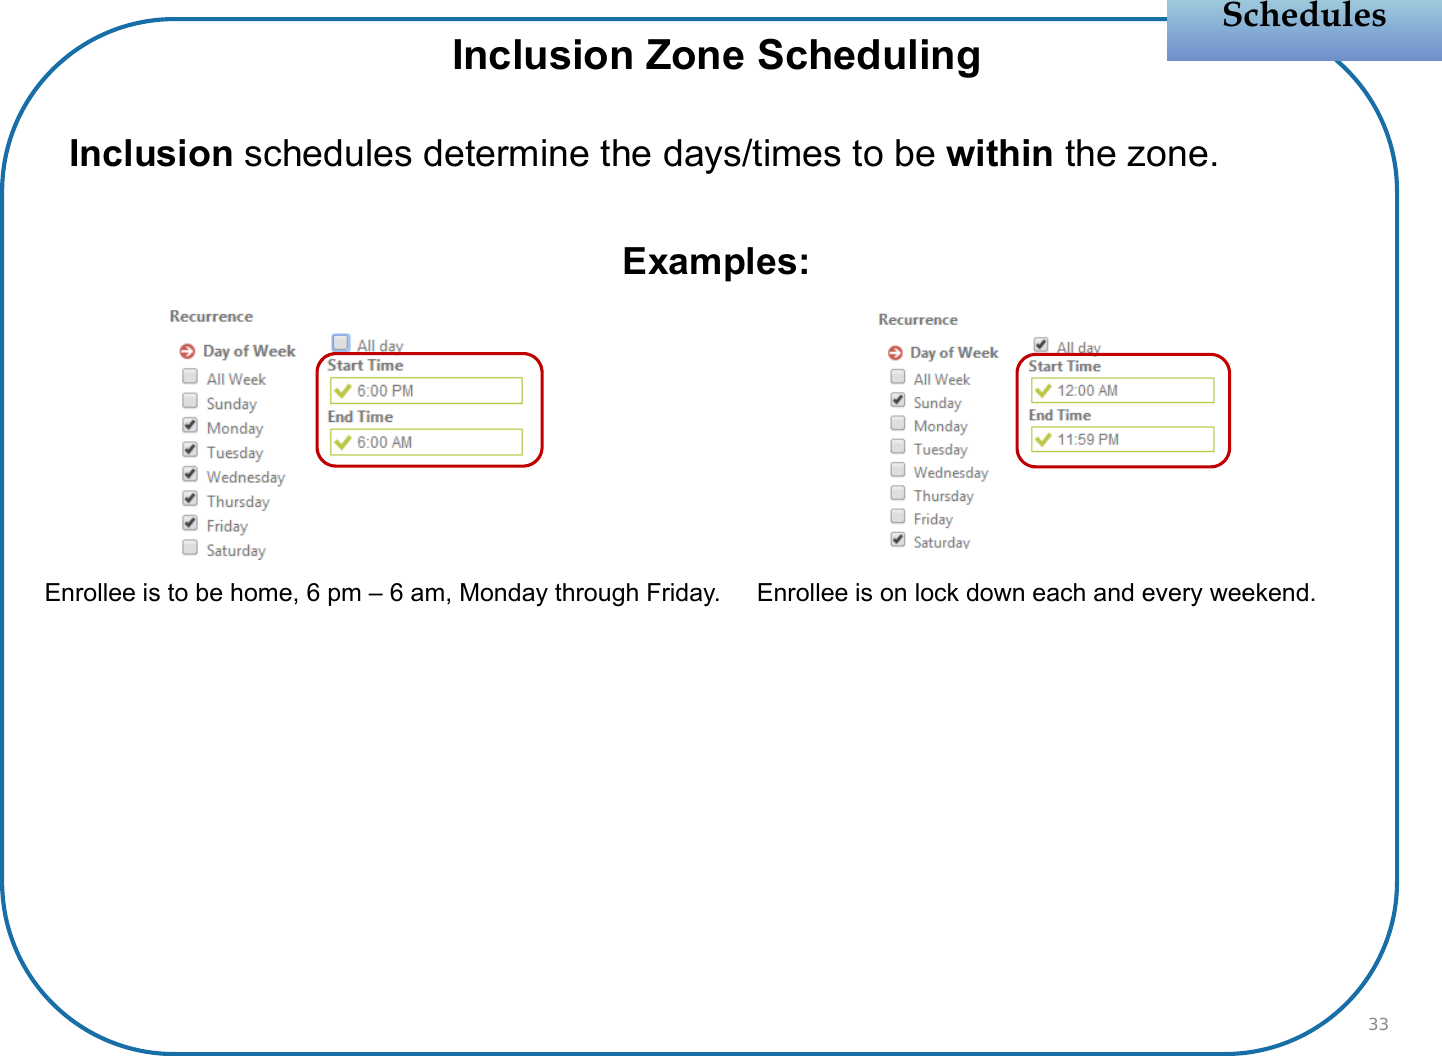 Inclusion Zone SchedulingInclusion schedules determine the days/times to be within the zone.Examples:SchedulesSchedules33Enrollee is to be home, 6 pm – 6 am, Monday through Friday. Enrollee is on lock down each and every weekend.